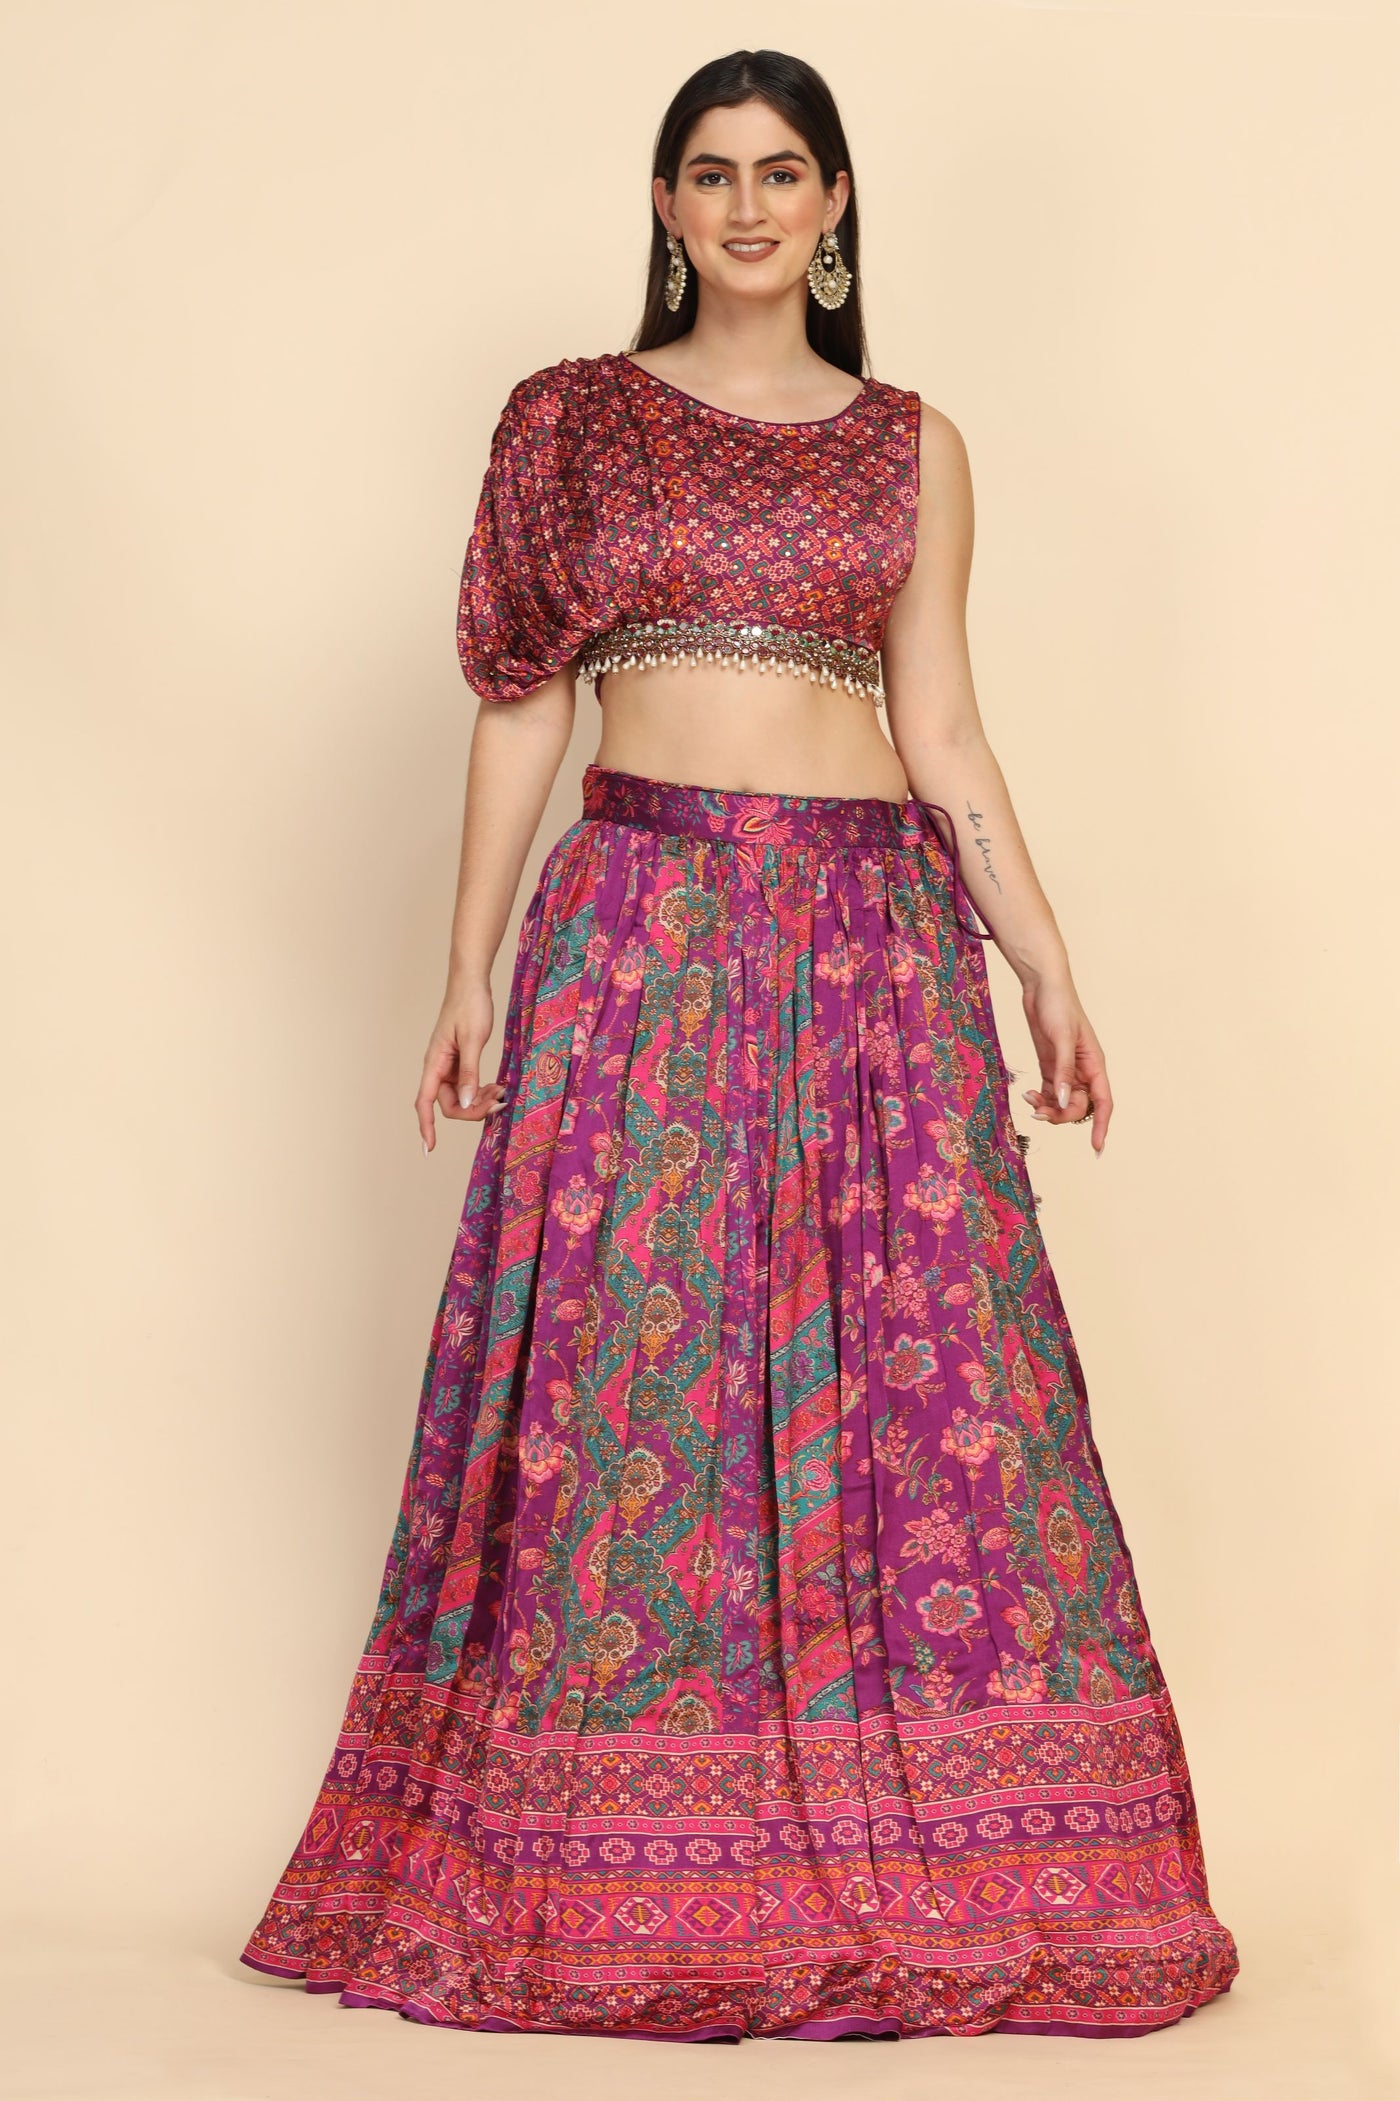 Off White Lehenga Skirt with Black Crop Top for Wedding | Skirt and crop  top indian, Crop top and skirt indian, Floral skirt